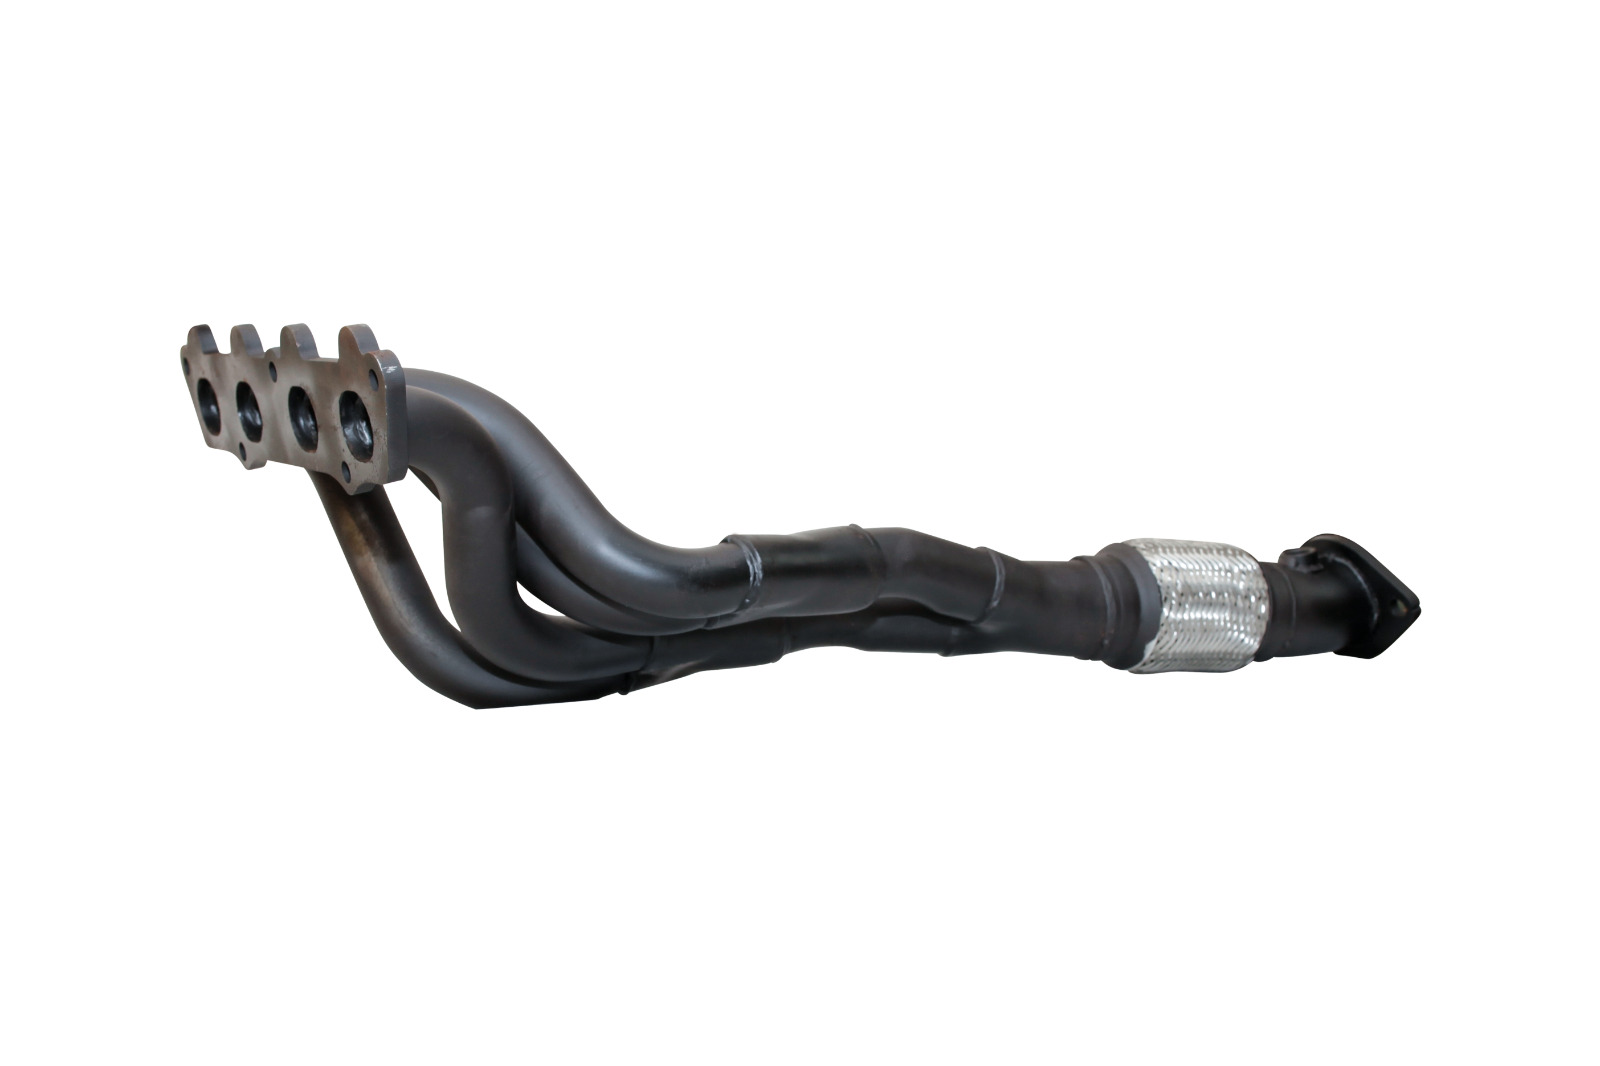 Headers / Extractors for Toyota Corolla ZZE-123 VVTL-I 2ZZ-GE 1.8L (5/03-5/07)